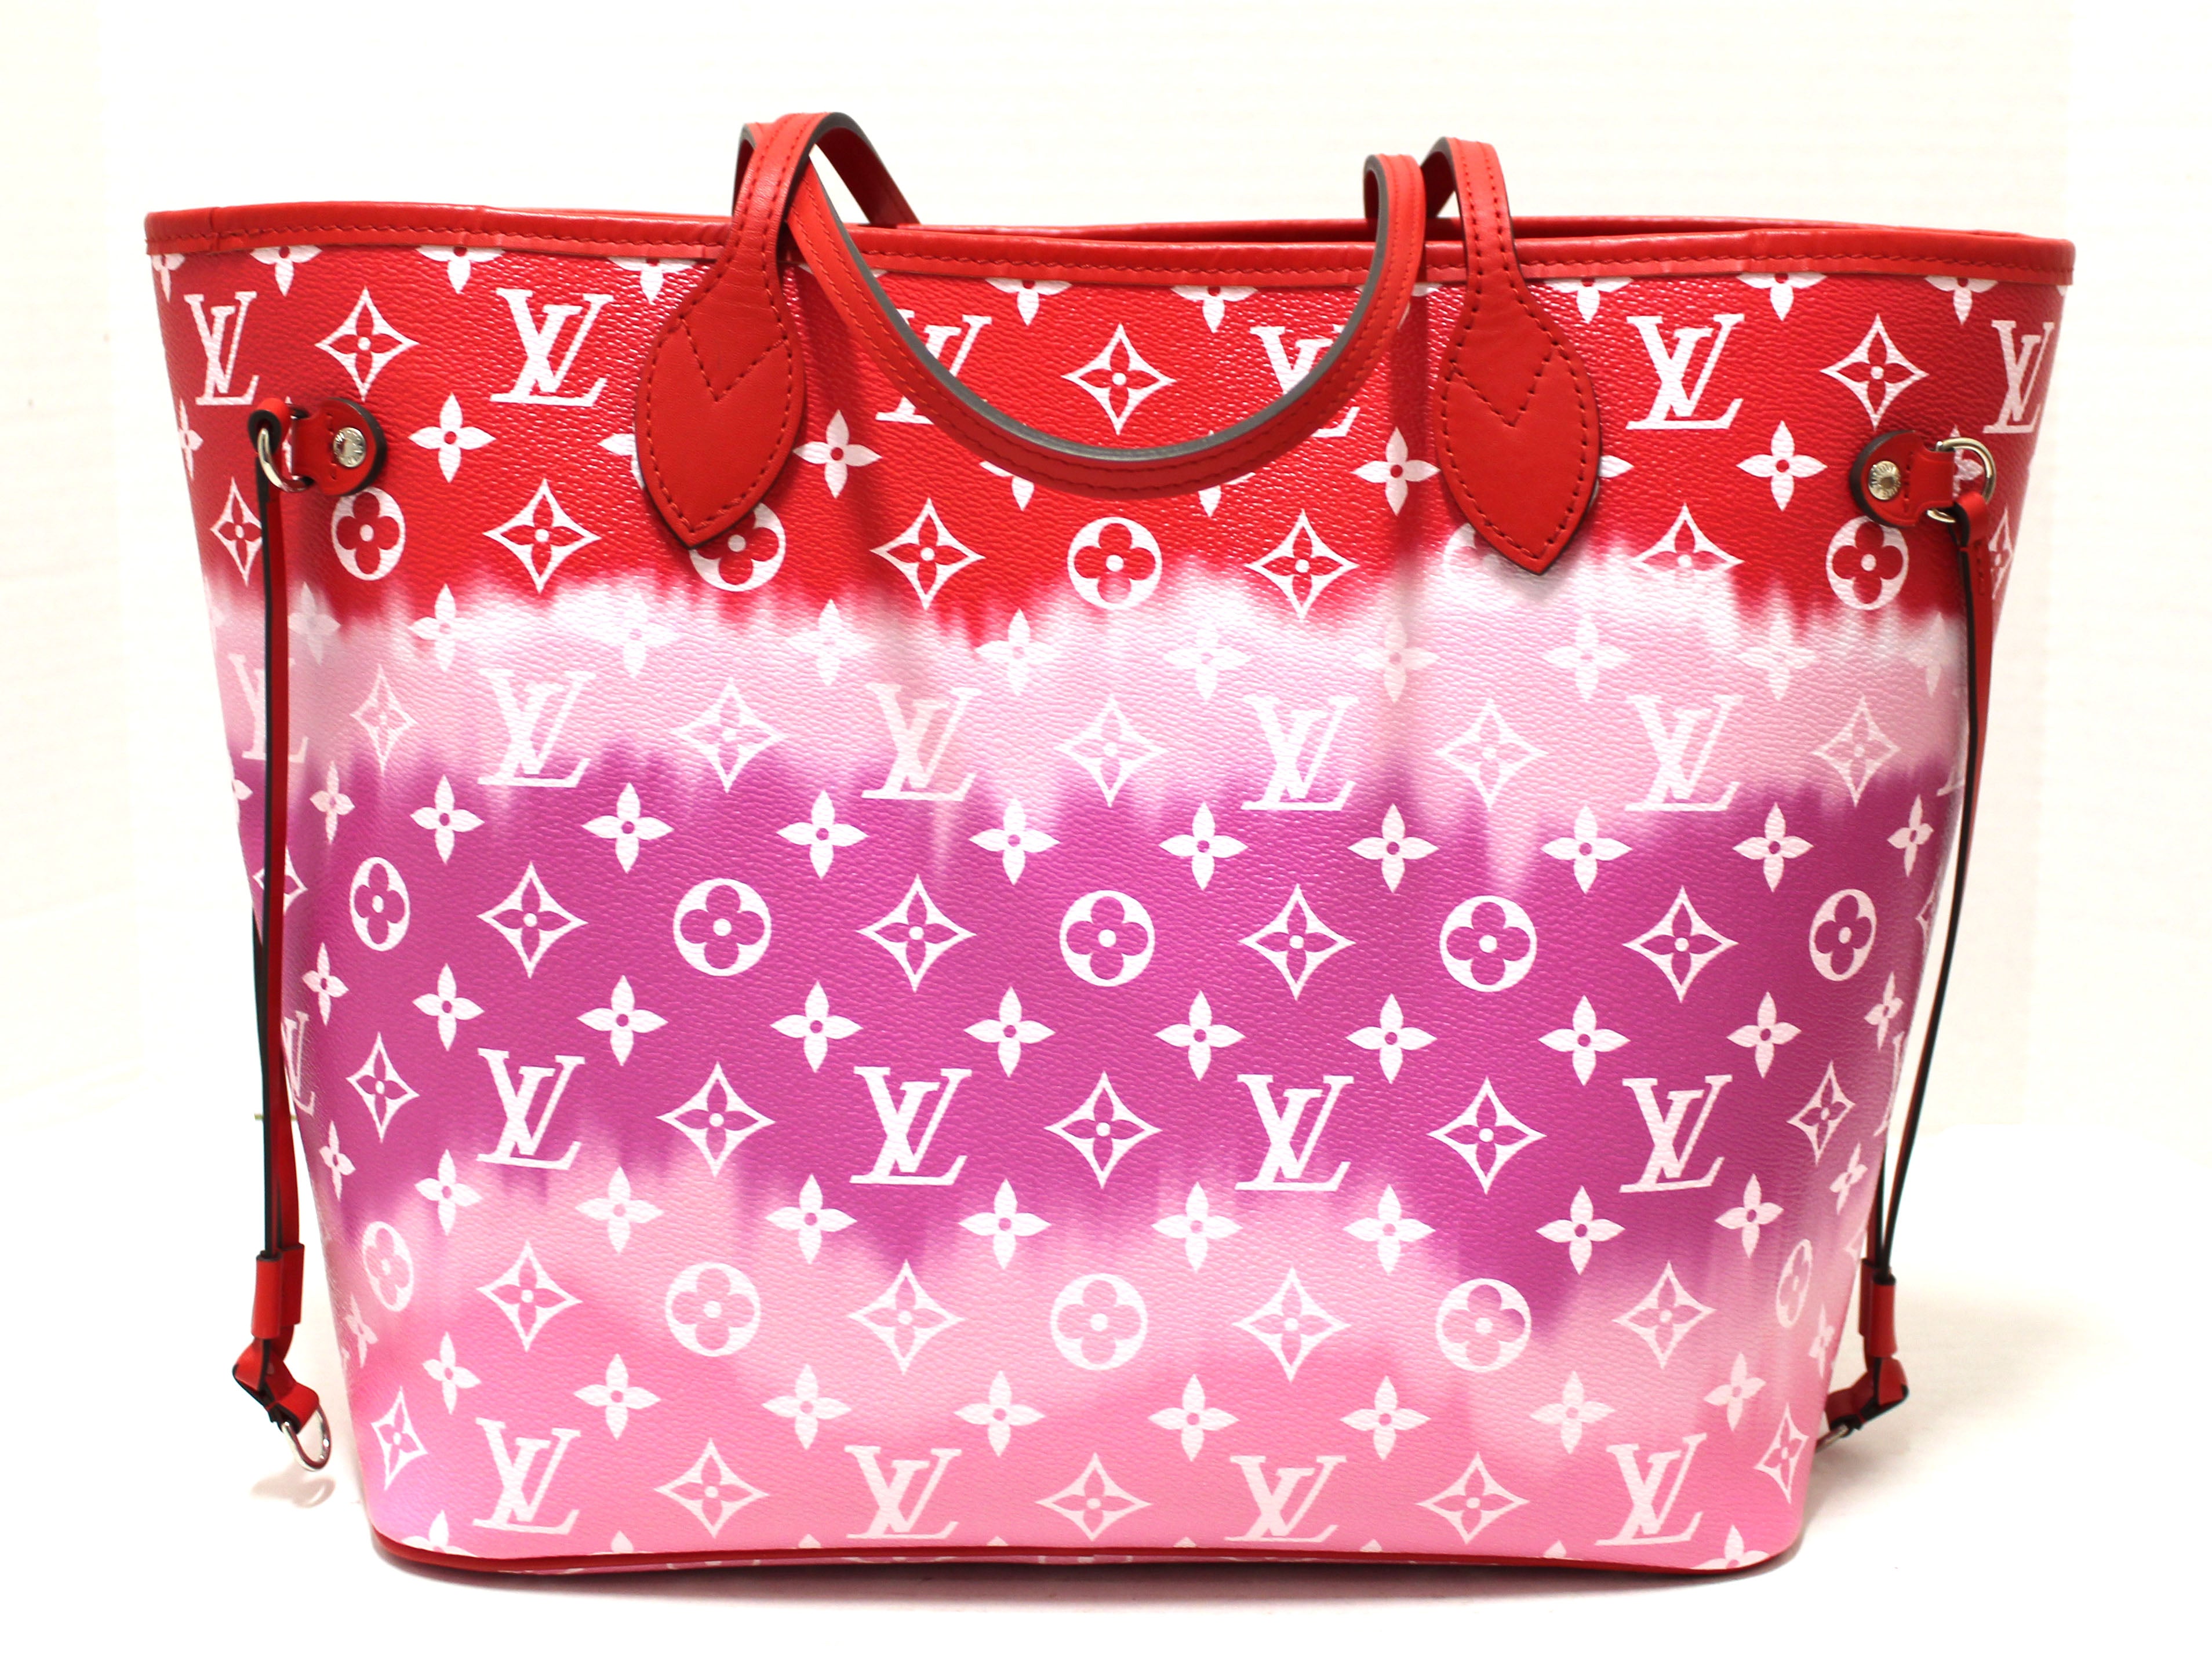 Authentic Louis Vuitton Pink/Red Escale Giant Monogram Neverfull MM Shoulder Bag